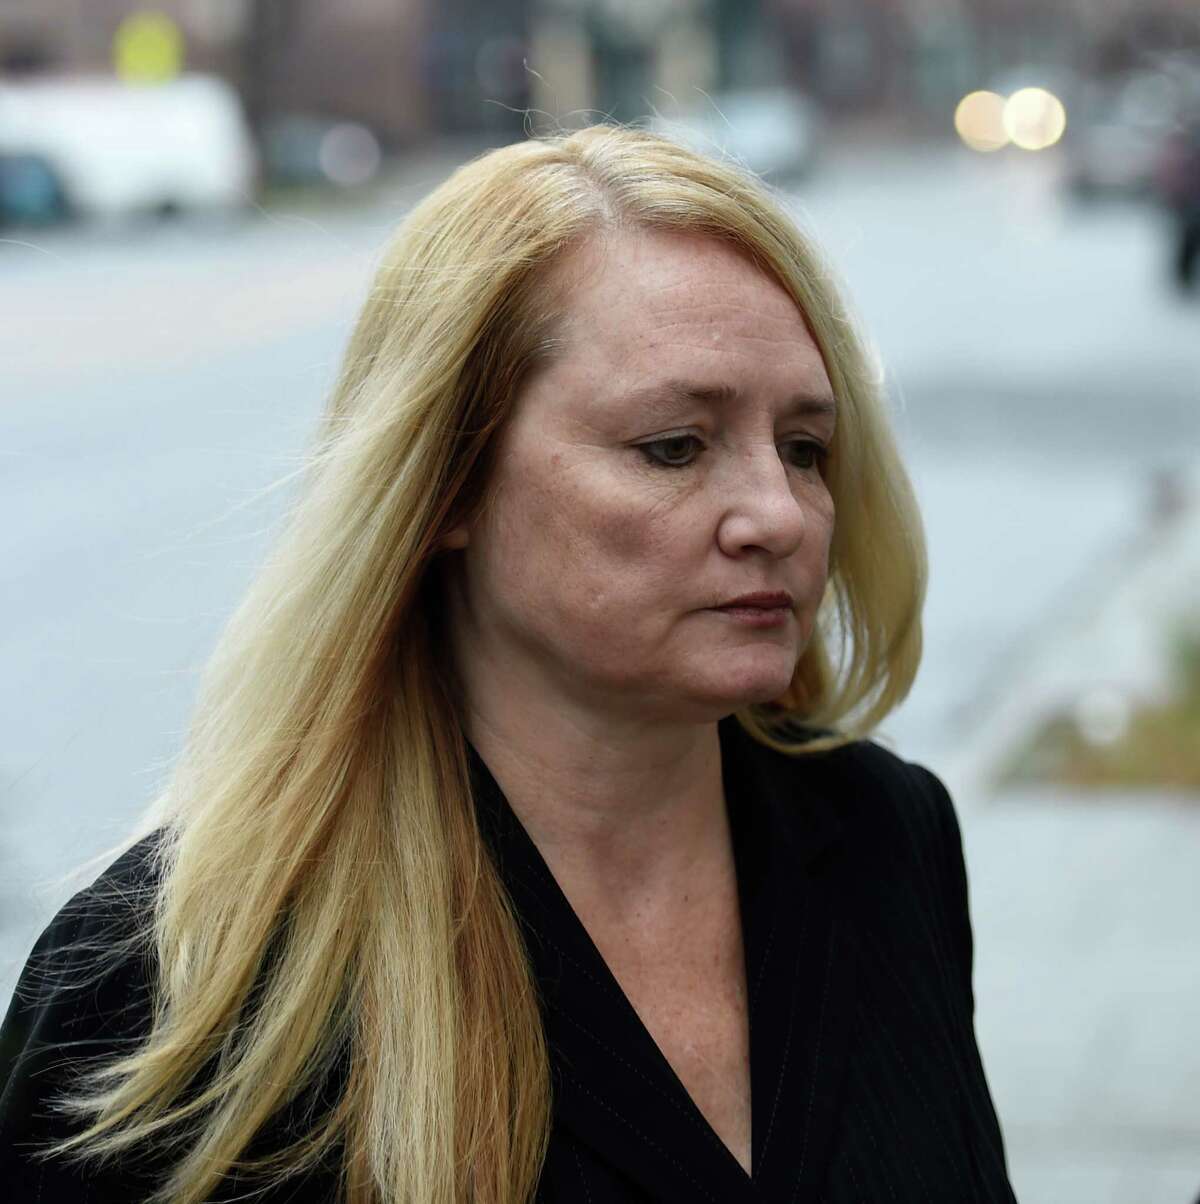 Mindy Wormuth arrives at Federal Court for sentencing Thursday morning Dec. 10, 2015 in Albany, N.Y. (Skip Dickstein/Times Union)